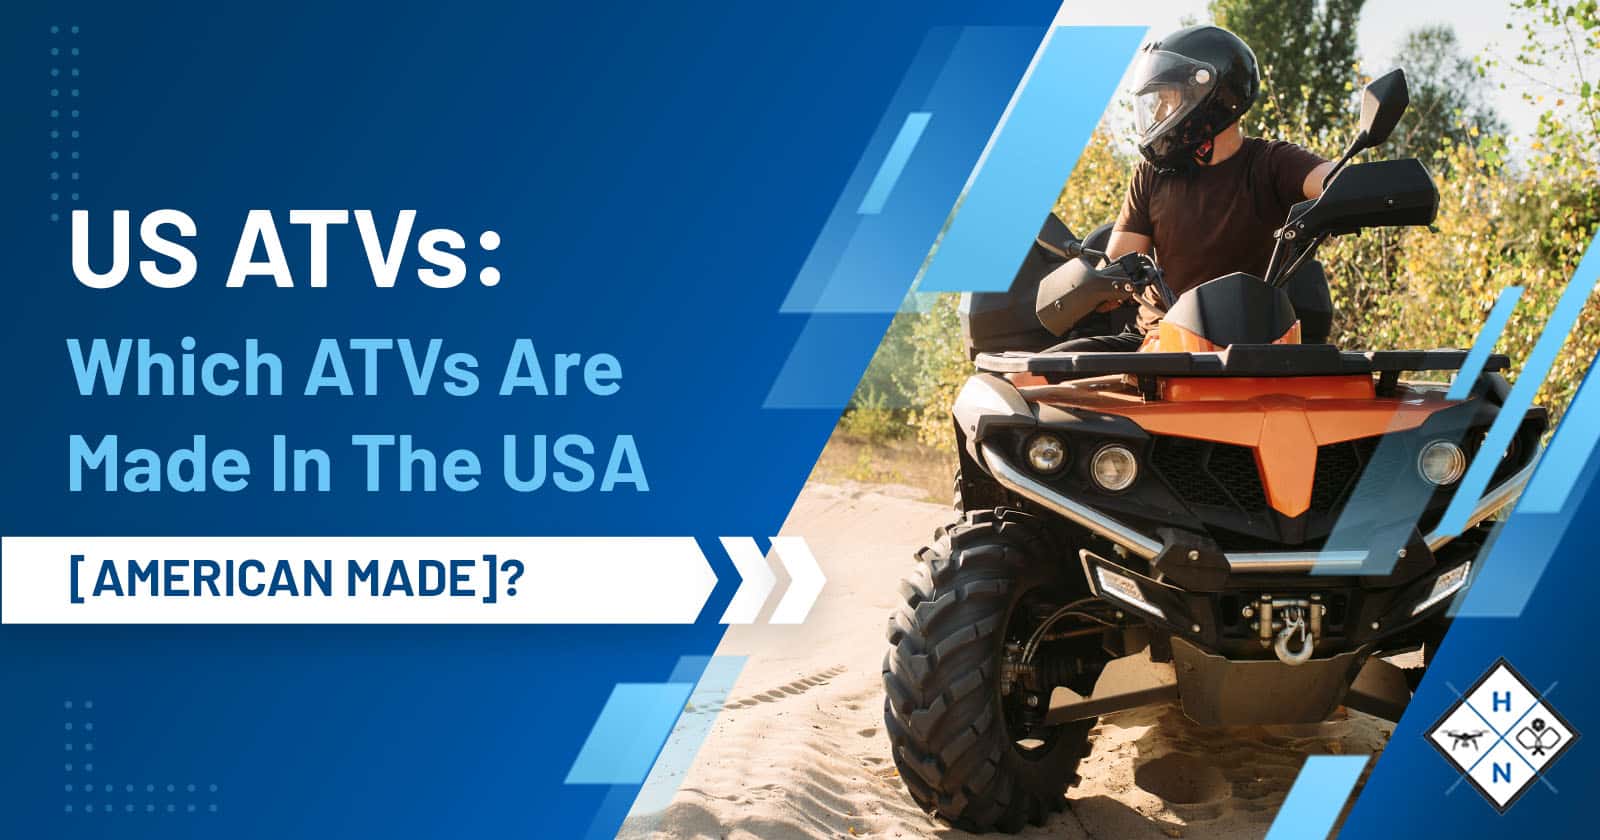 US ATVs: Which ATVs Are Made In The USA [AMERICAN MADE]?